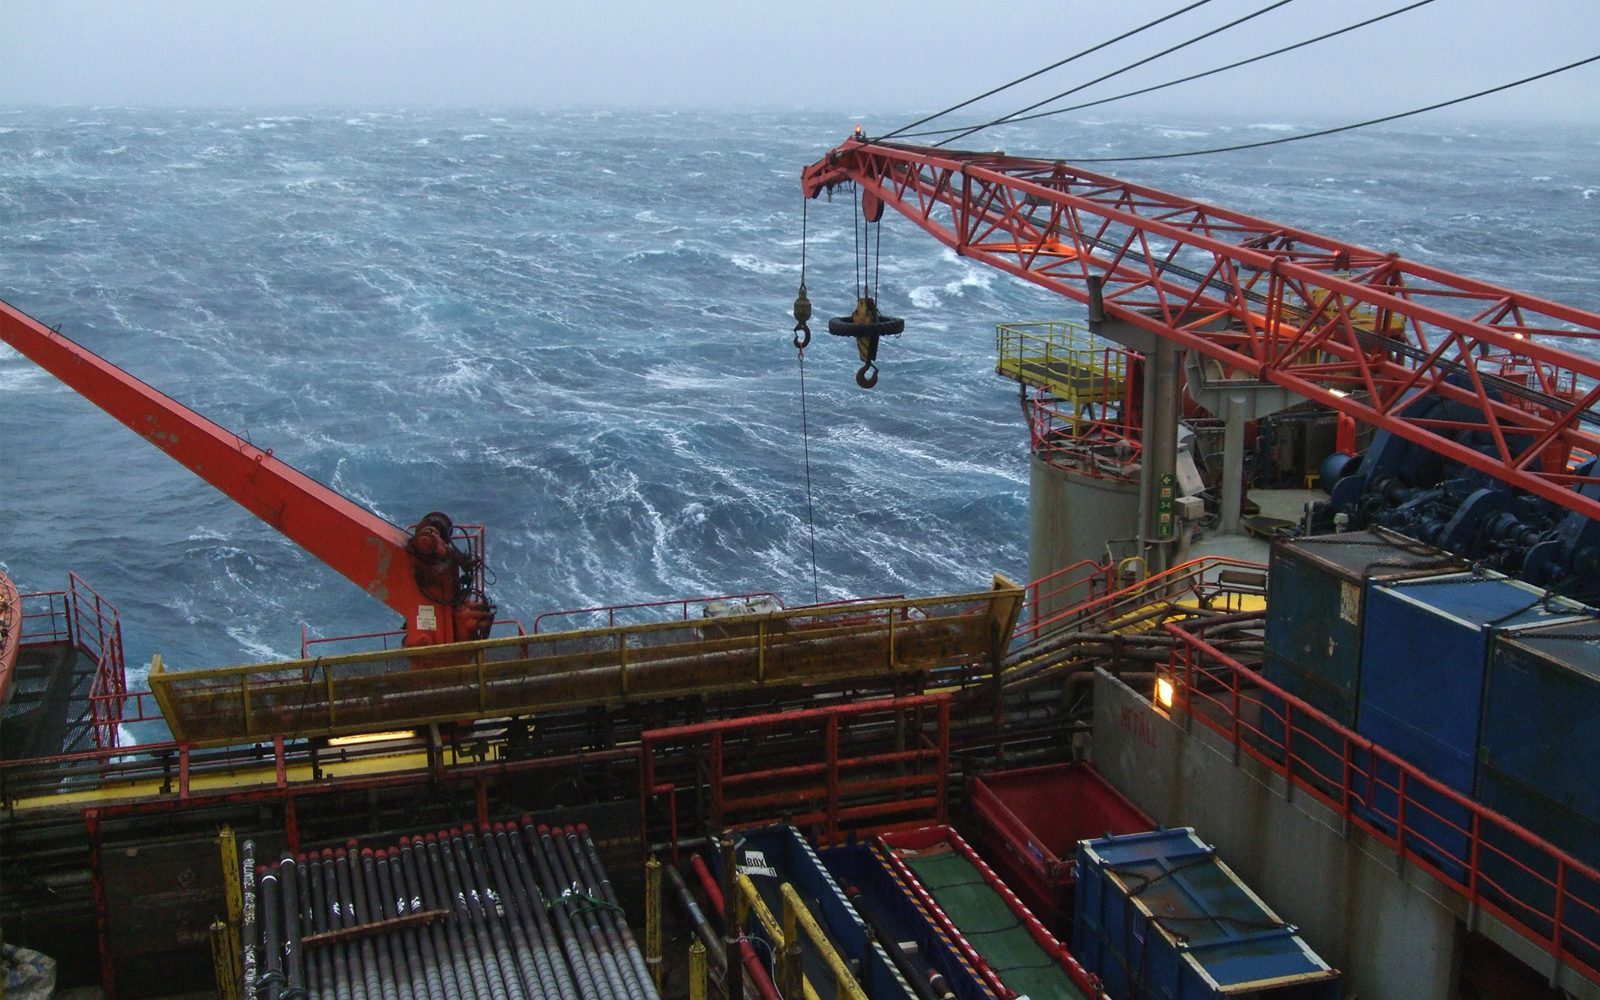 Choosing The Right Mix Of Forecasts For Offshore Planning